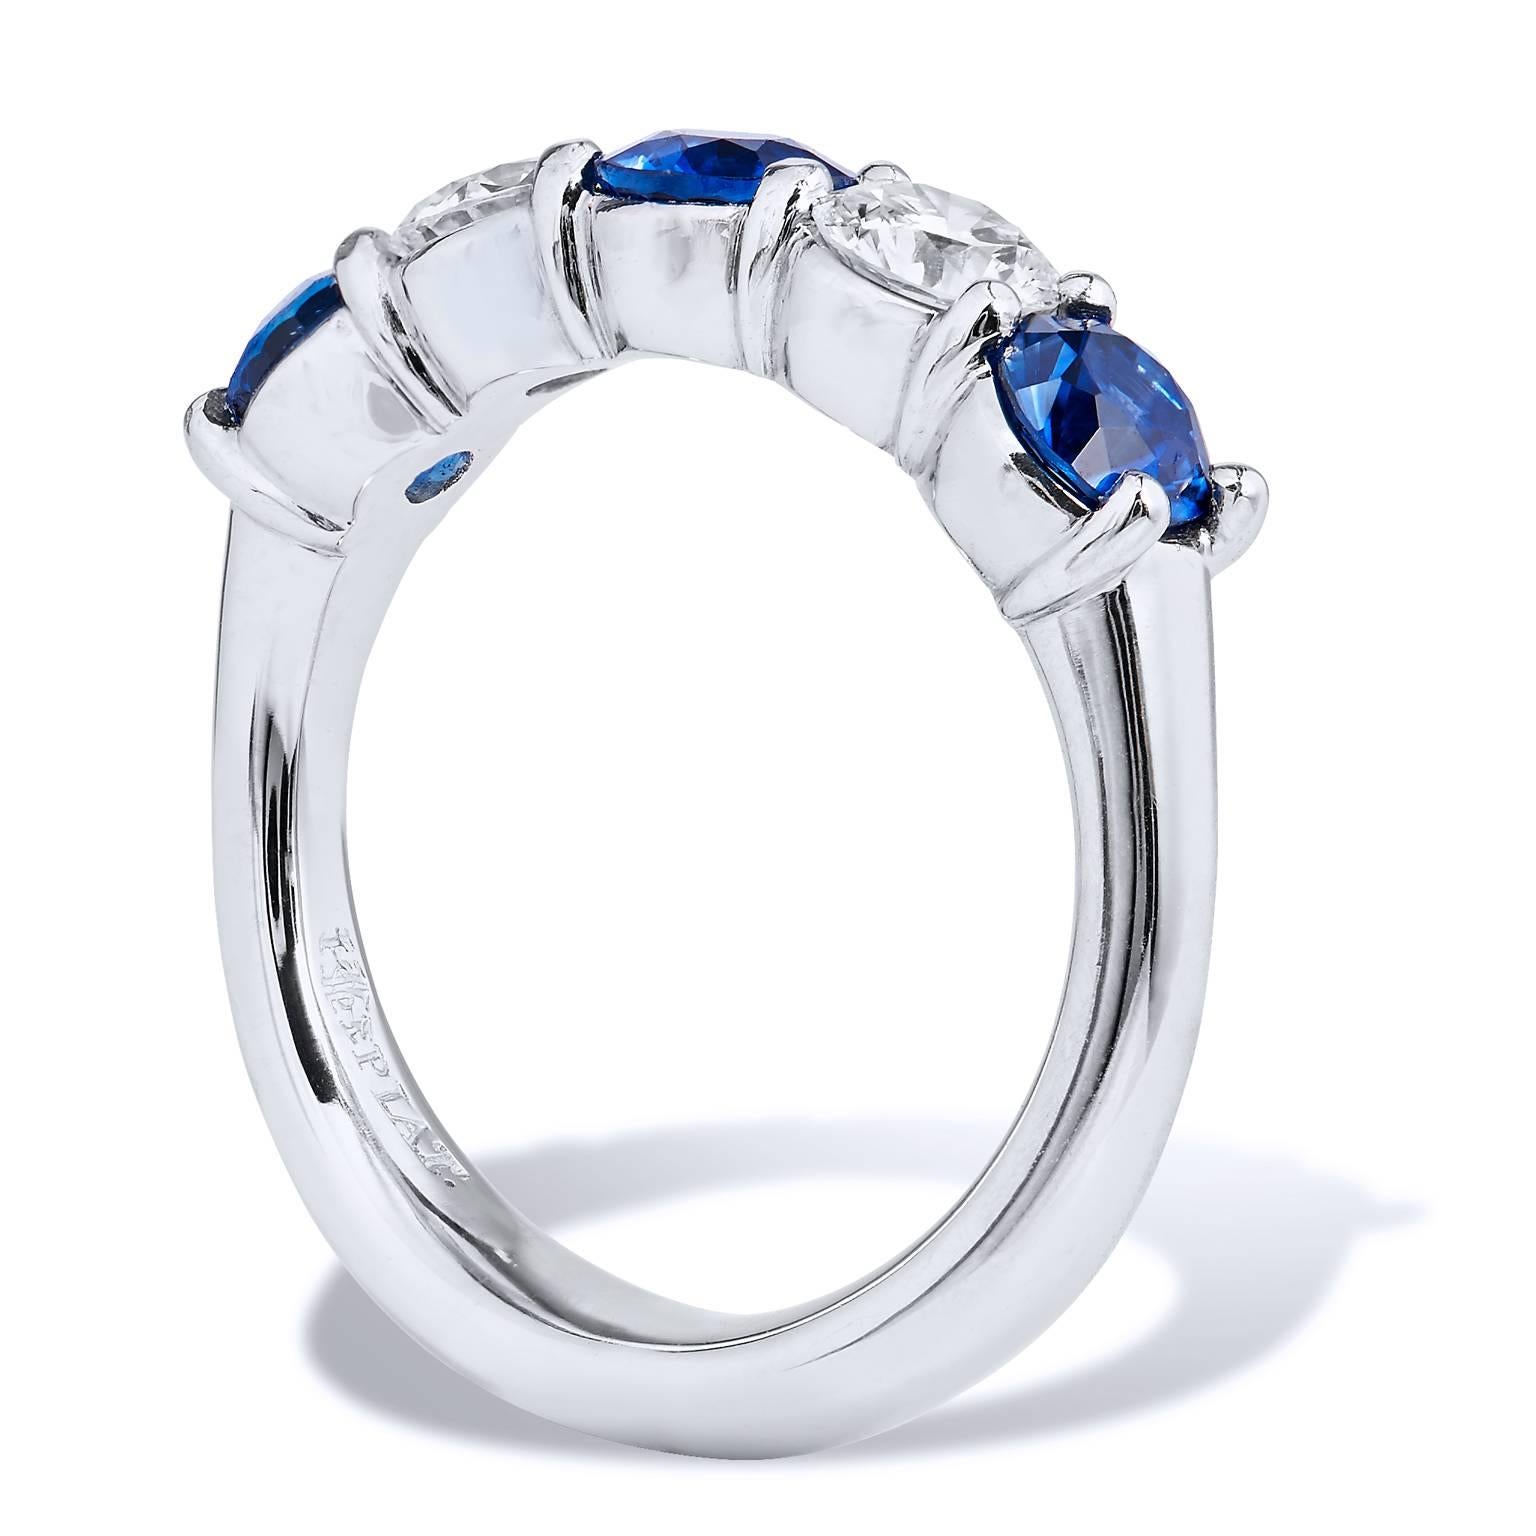 This platinum wedding band ring features three blue sapphires with a total weight of 1.48 carats. Interlaced between two Round Brilliant Cut diamonds (E/F/VS) in a shared prong style, with a total weight of 0.70 carat, this band ring stirs and